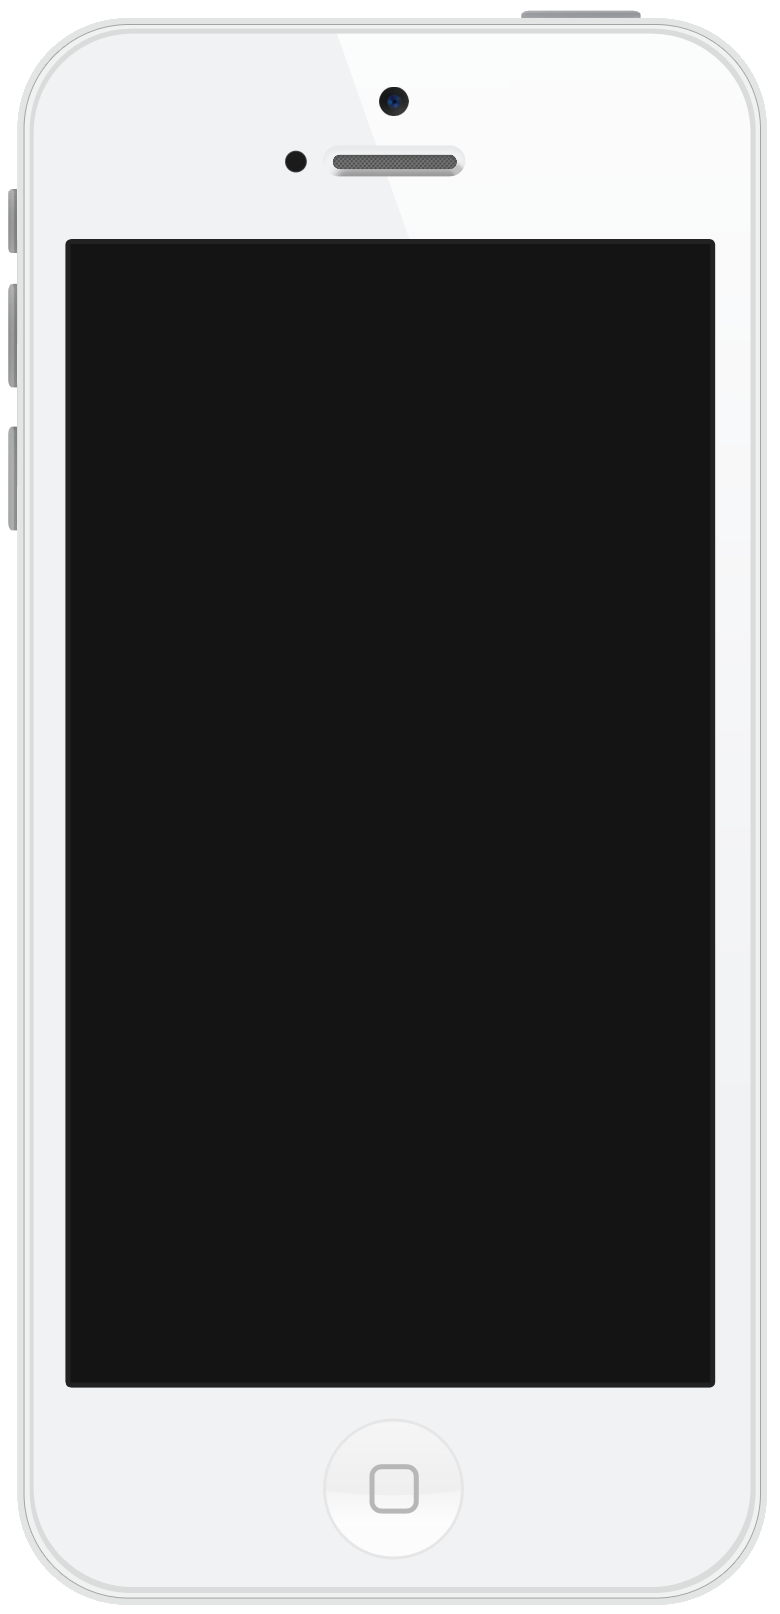 Iphone Apple PNG Image